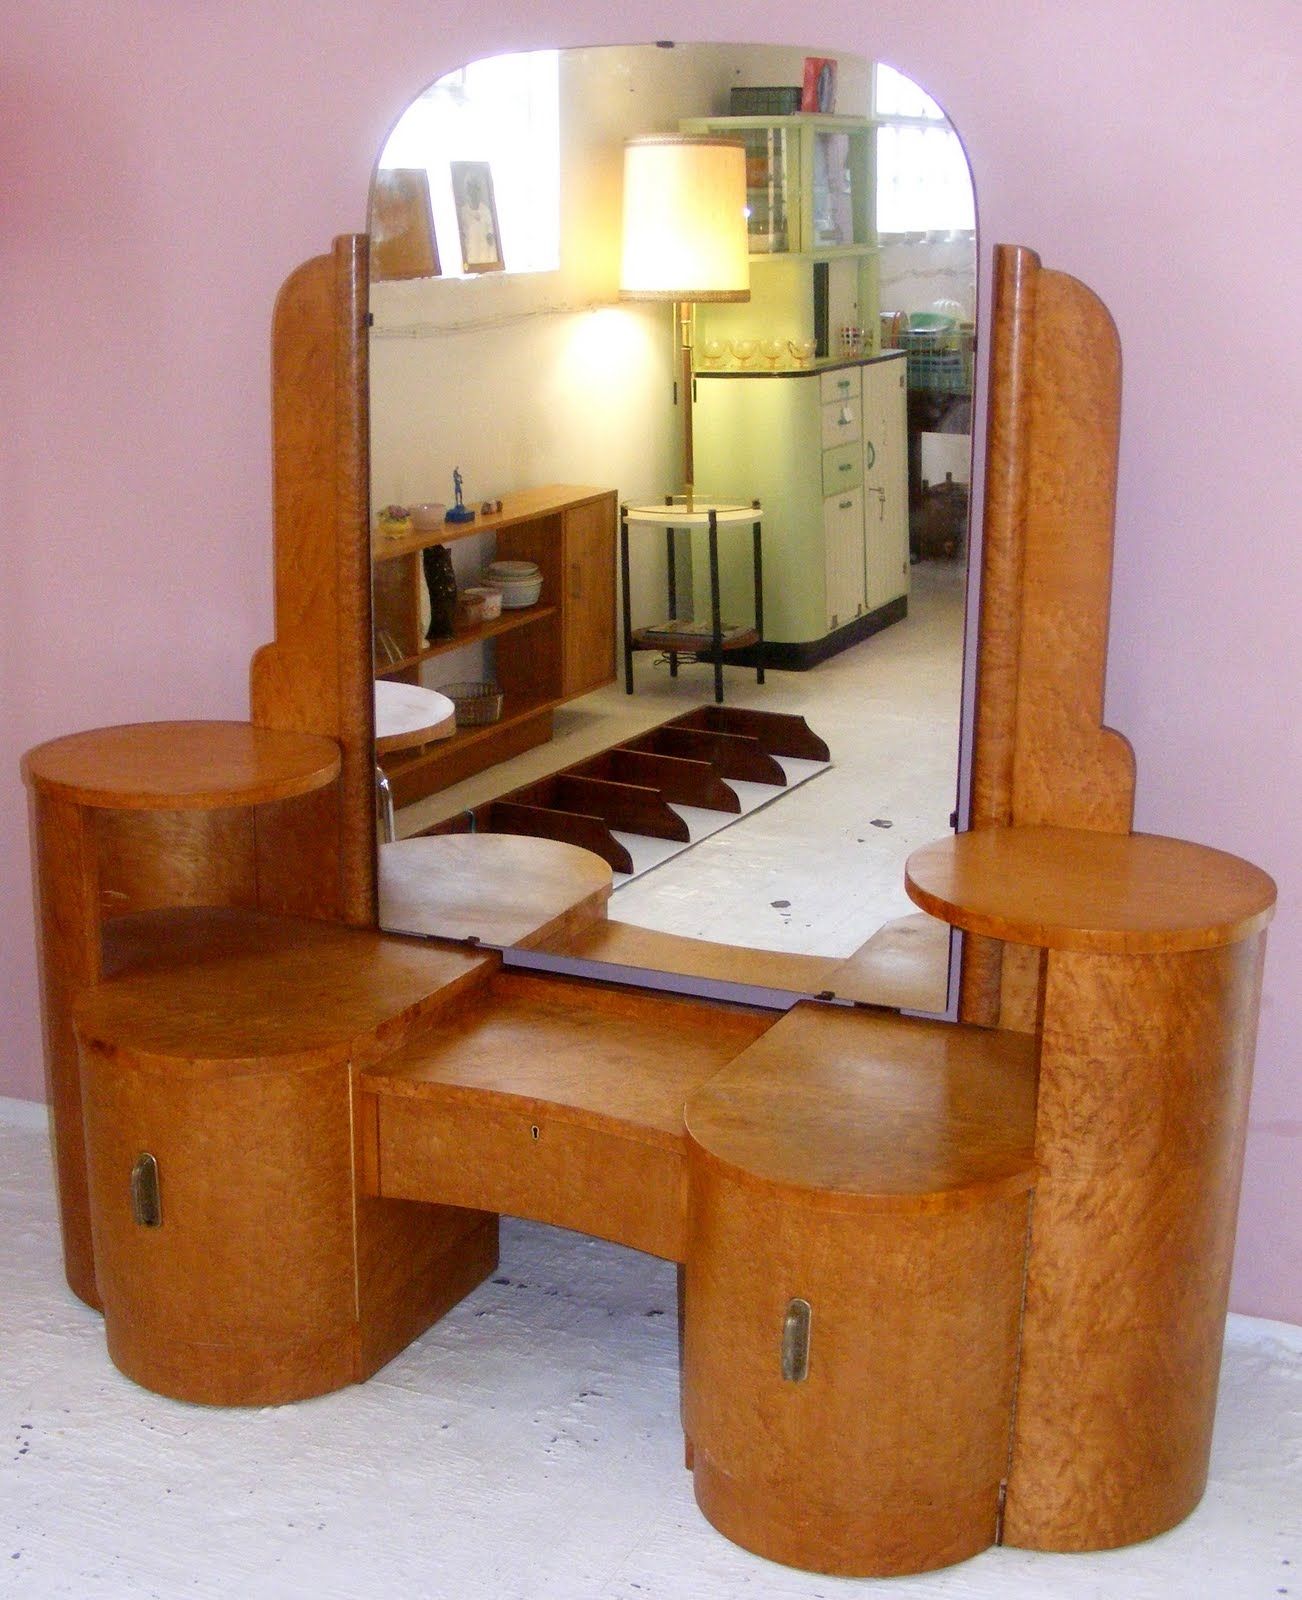 Google Image Result For Http2bpblogspotiirlu3fh4ia Pertaining To Art Deco Mirrored Dressing Table (View 8 of 15)